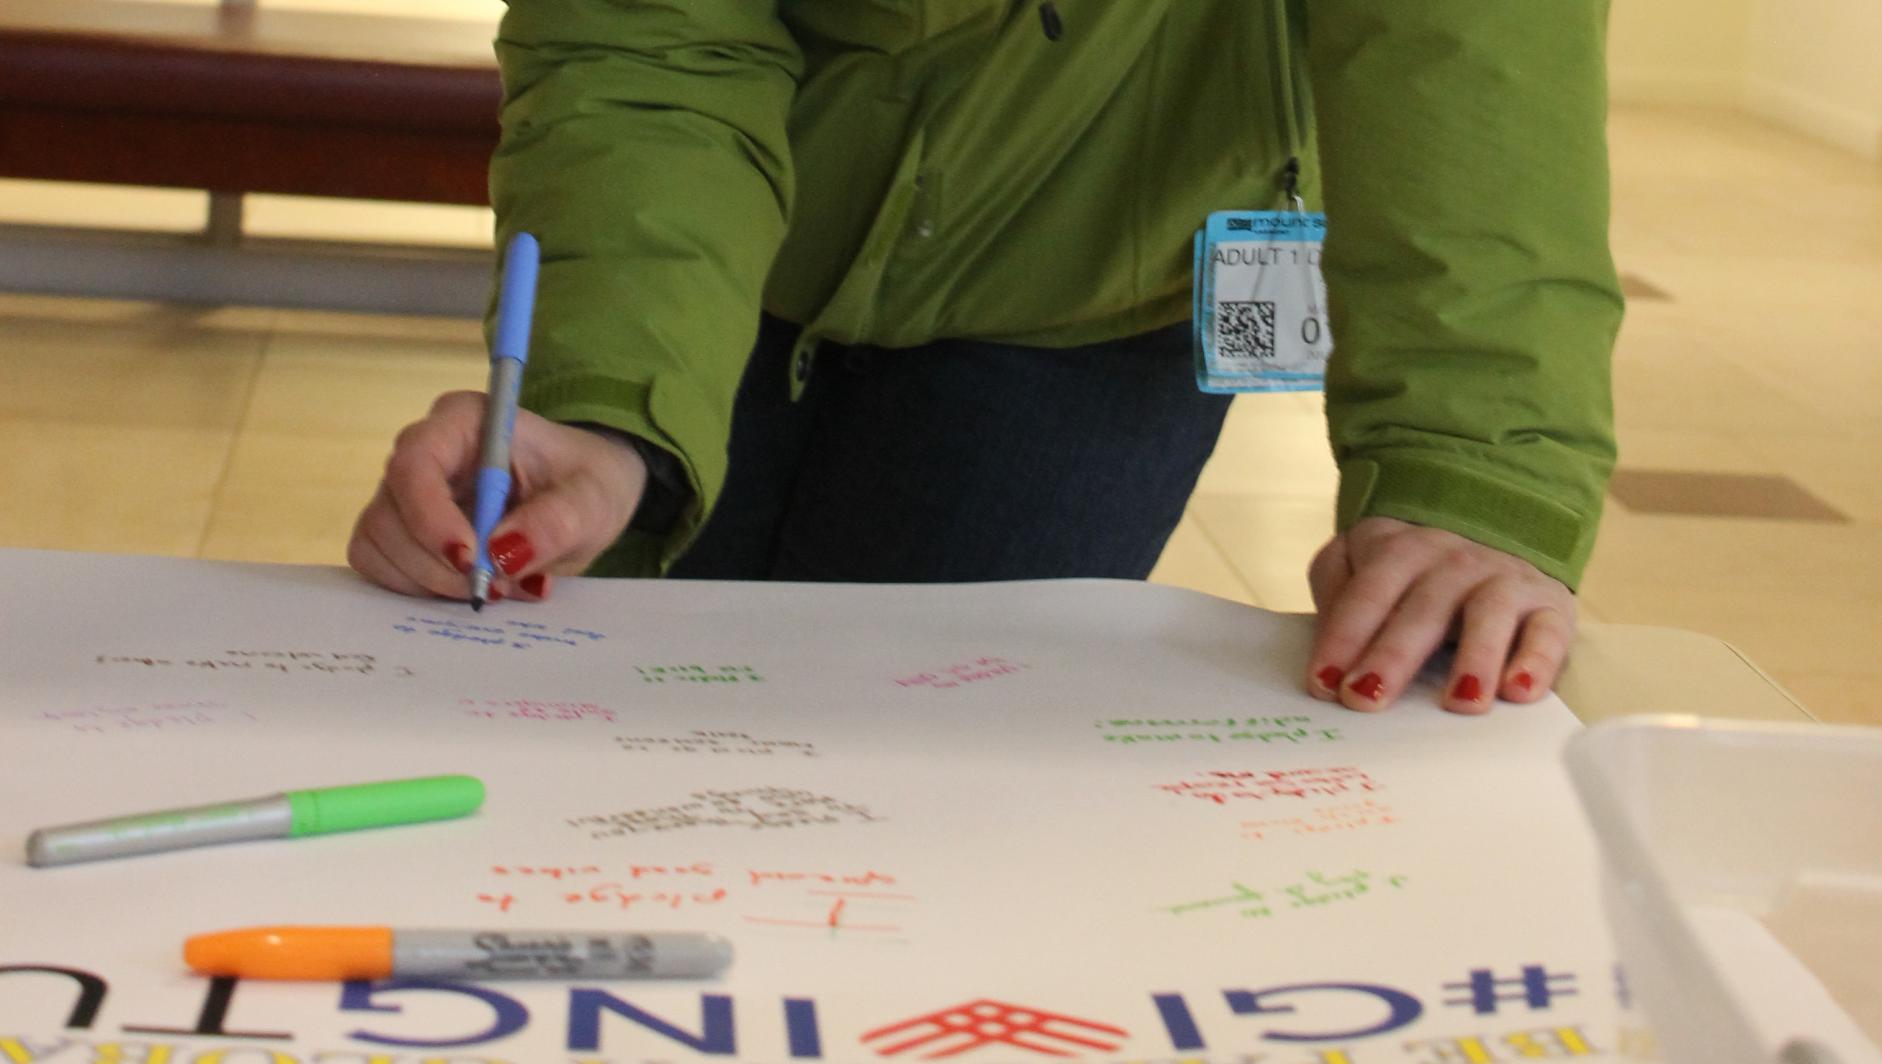 Springfield College student signing poster board during #GivingTuesday